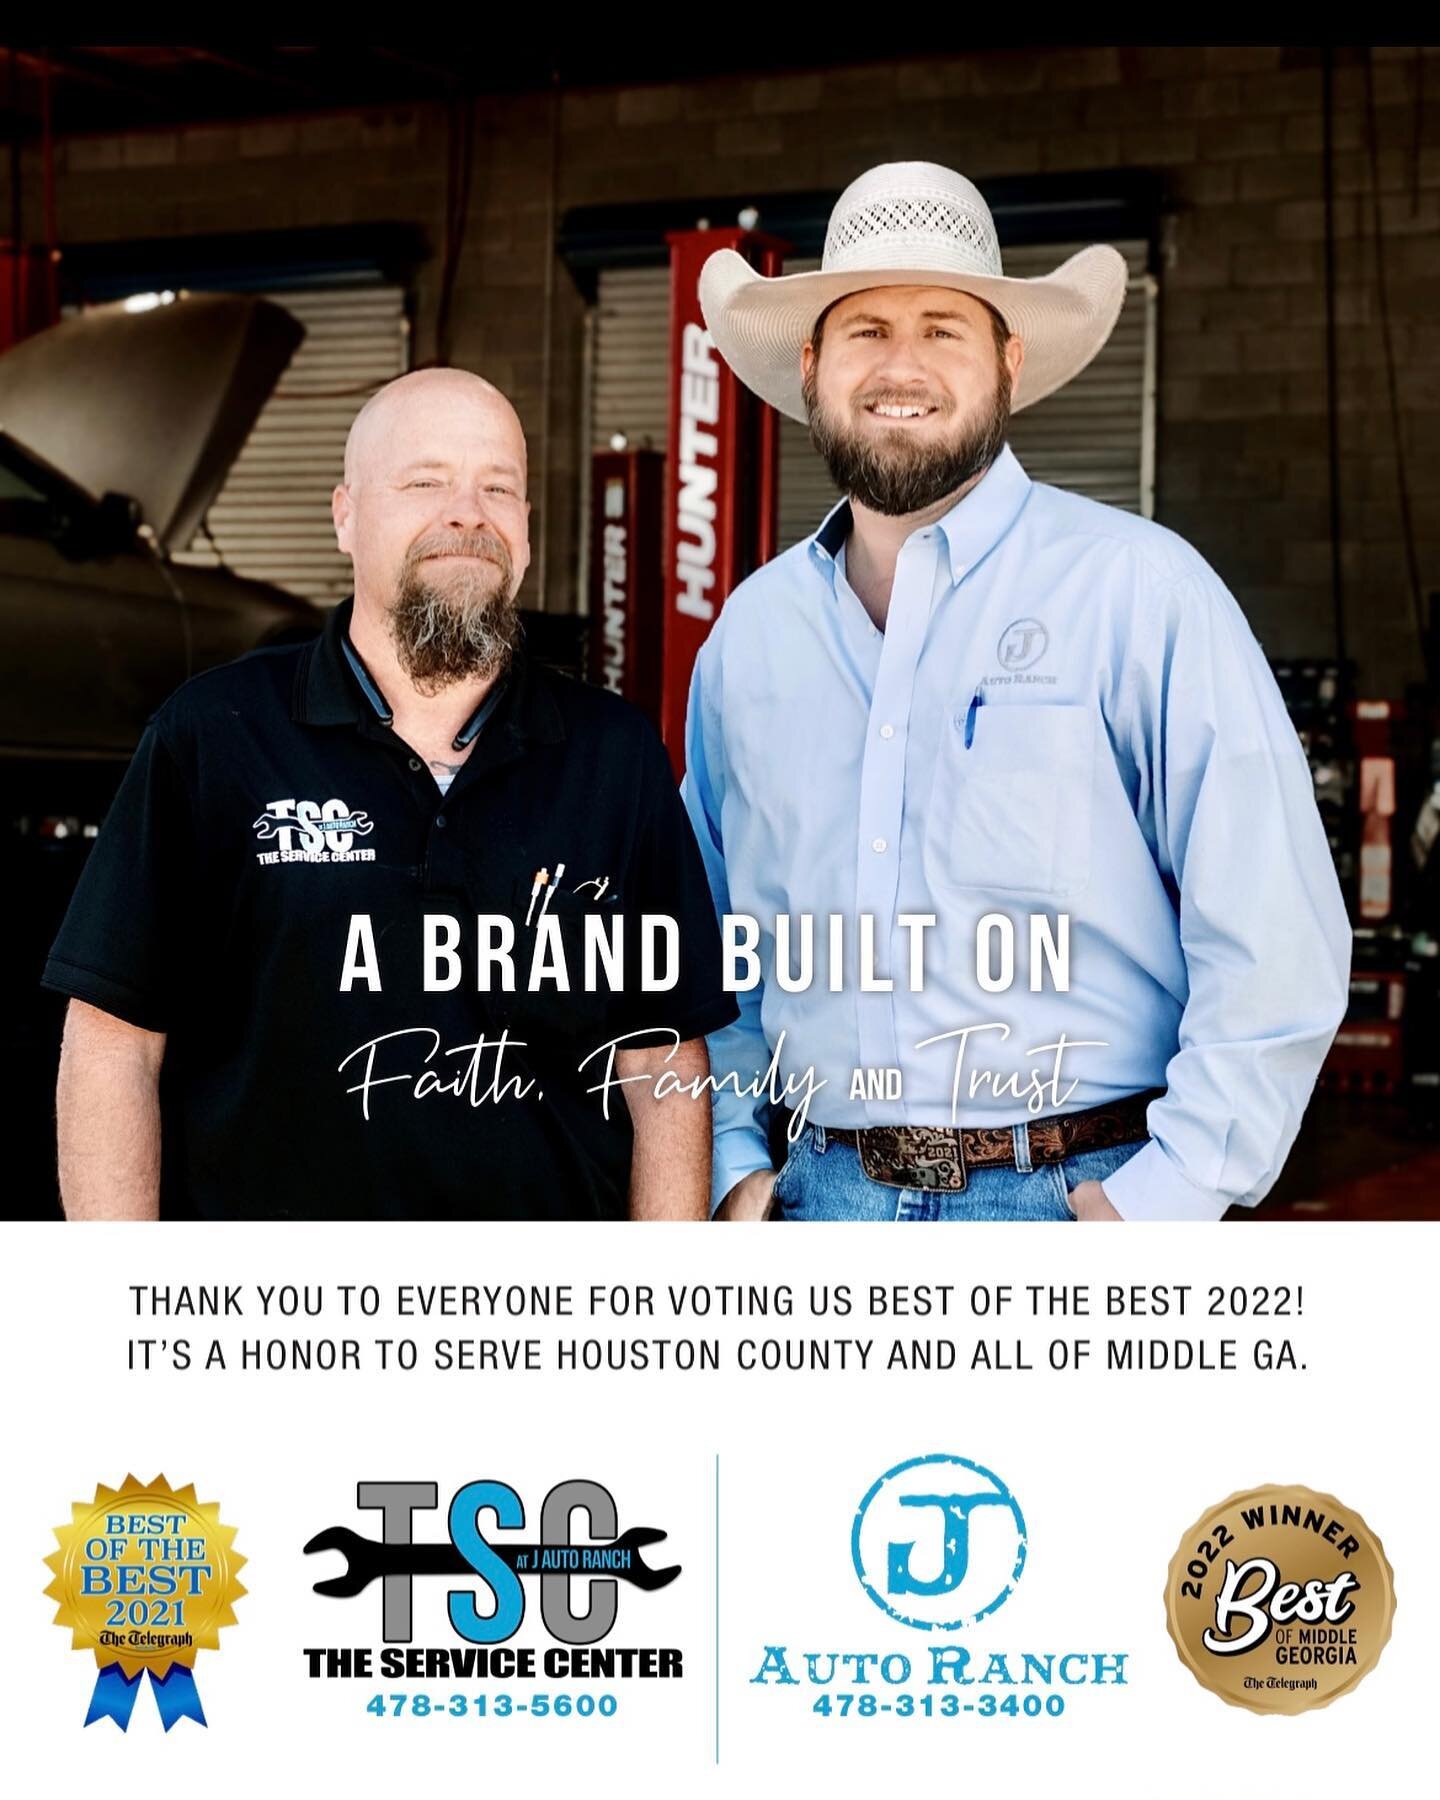 Friends! ✨
We&rsquo;re sharing this pretty Wednesday with some of our favorite local guys from J Auto Ranch and The Service Center! ✨

&lsquo;A brand built on Faith, Family and Trust.&rsquo;

Located at:
1250 S Houston Lake Rd | Warner Robins, GA

ja